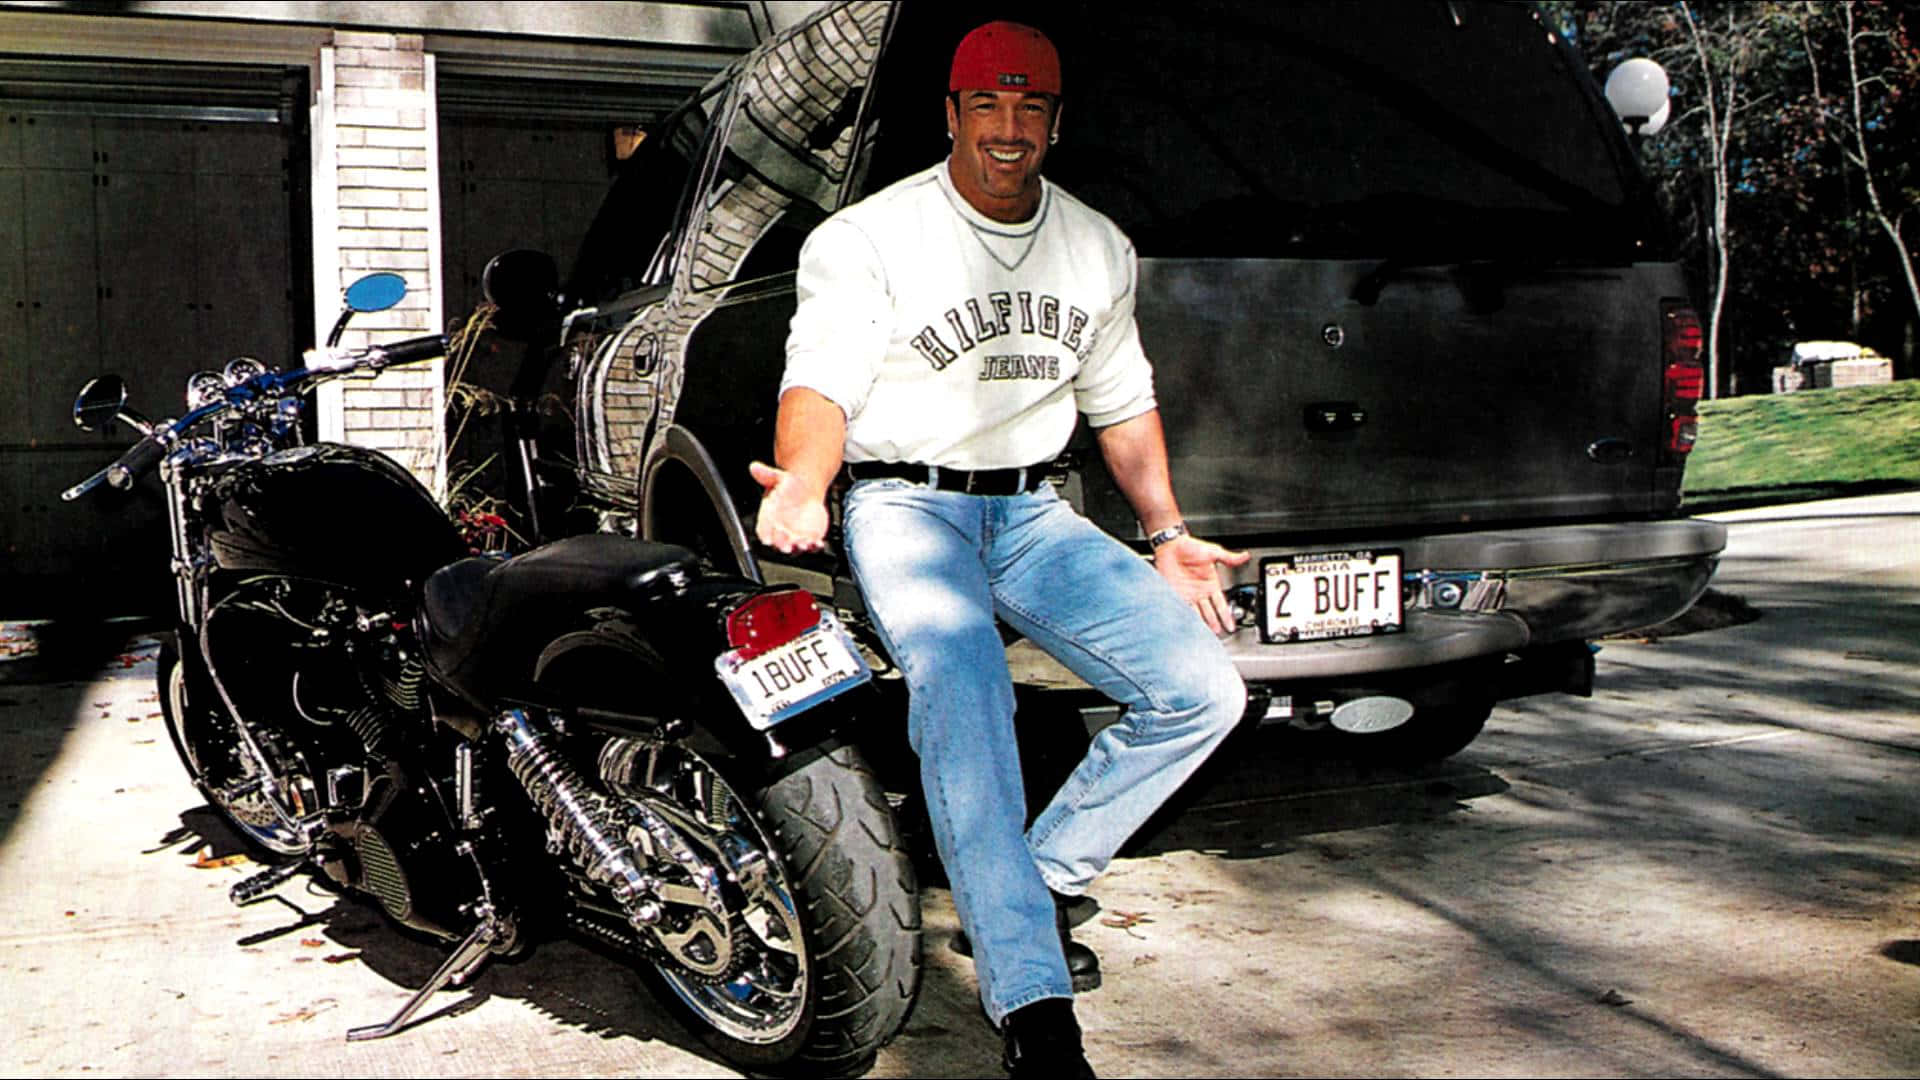 Buff Bagwell Wrestler Motorcycle Car Photography Wallpaper